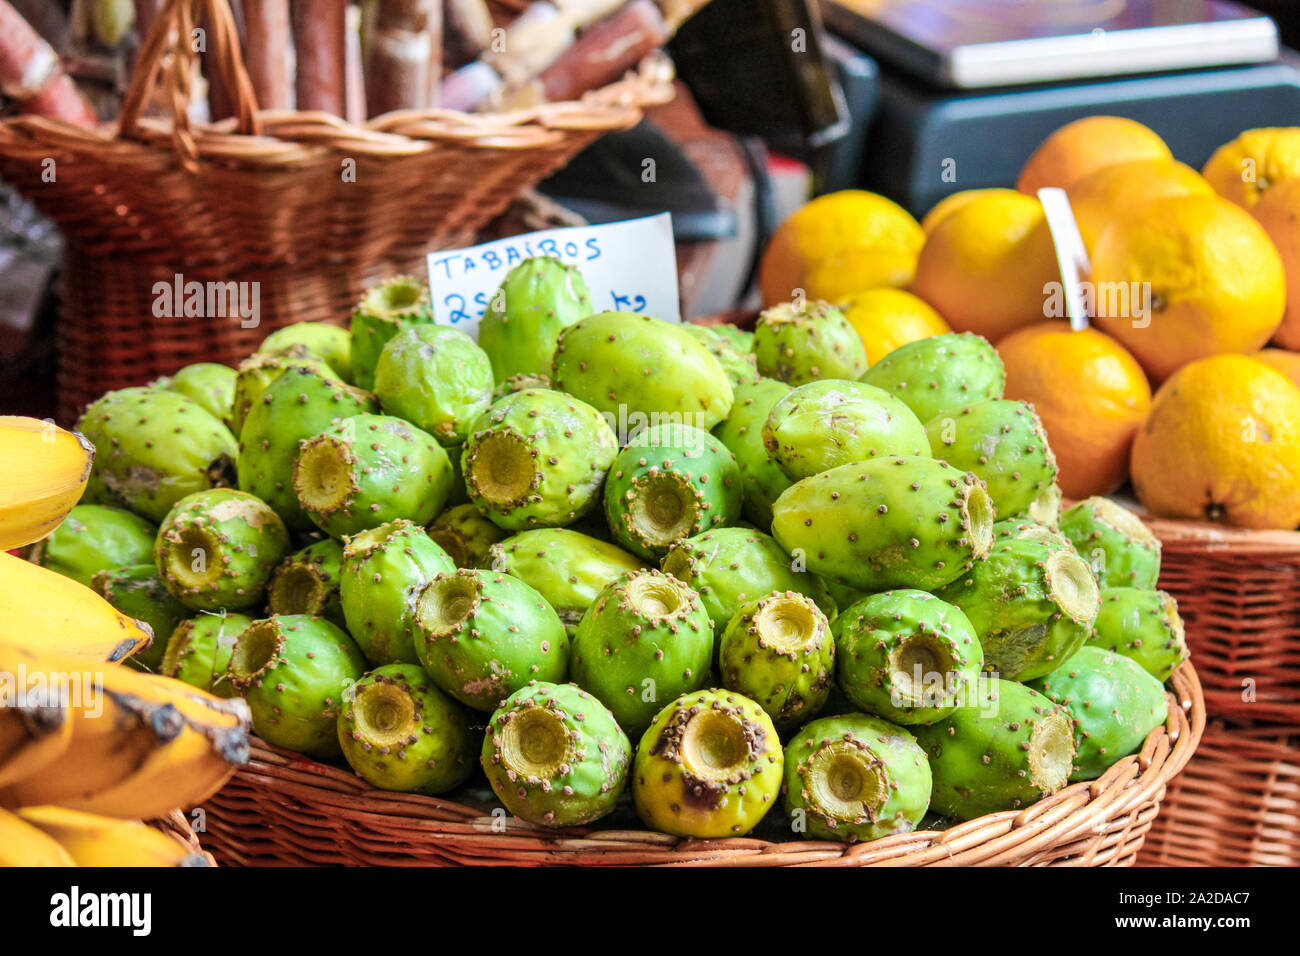 Green opuntia fruits on a local market in Funchal, Madeira, Portugal. Prickly pears or Indian figs. Exotic fruits, grown on cactus. TRANSLATION OF THE SIGN: Tabaibos - opuntia fruits in Portuguese. Stock Photo